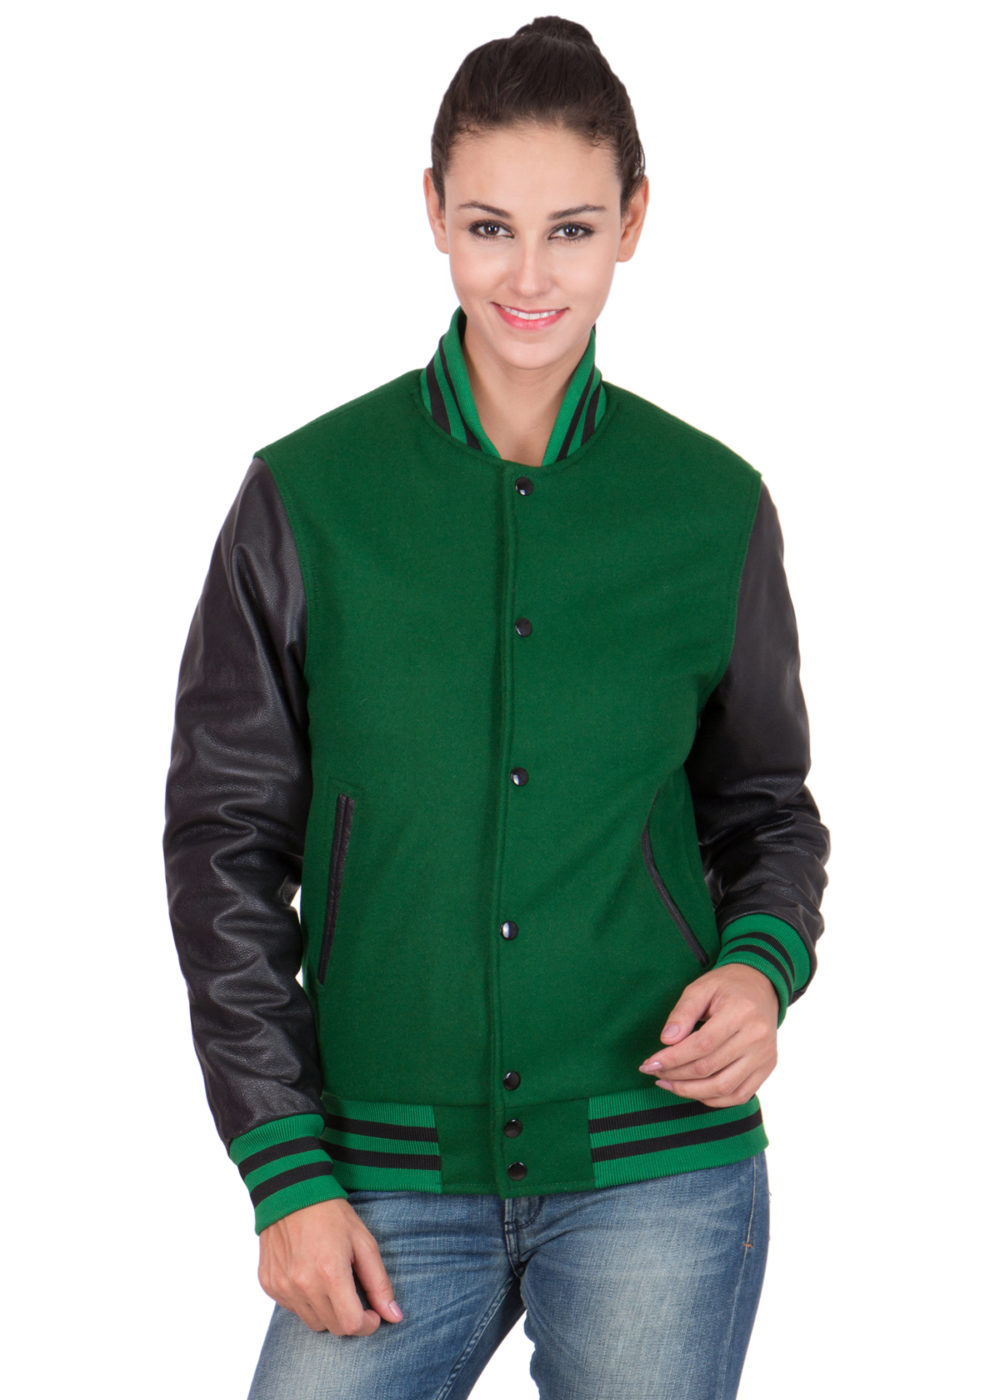 Green Wool Body with Black Leather Sleeves Varsity Jacket